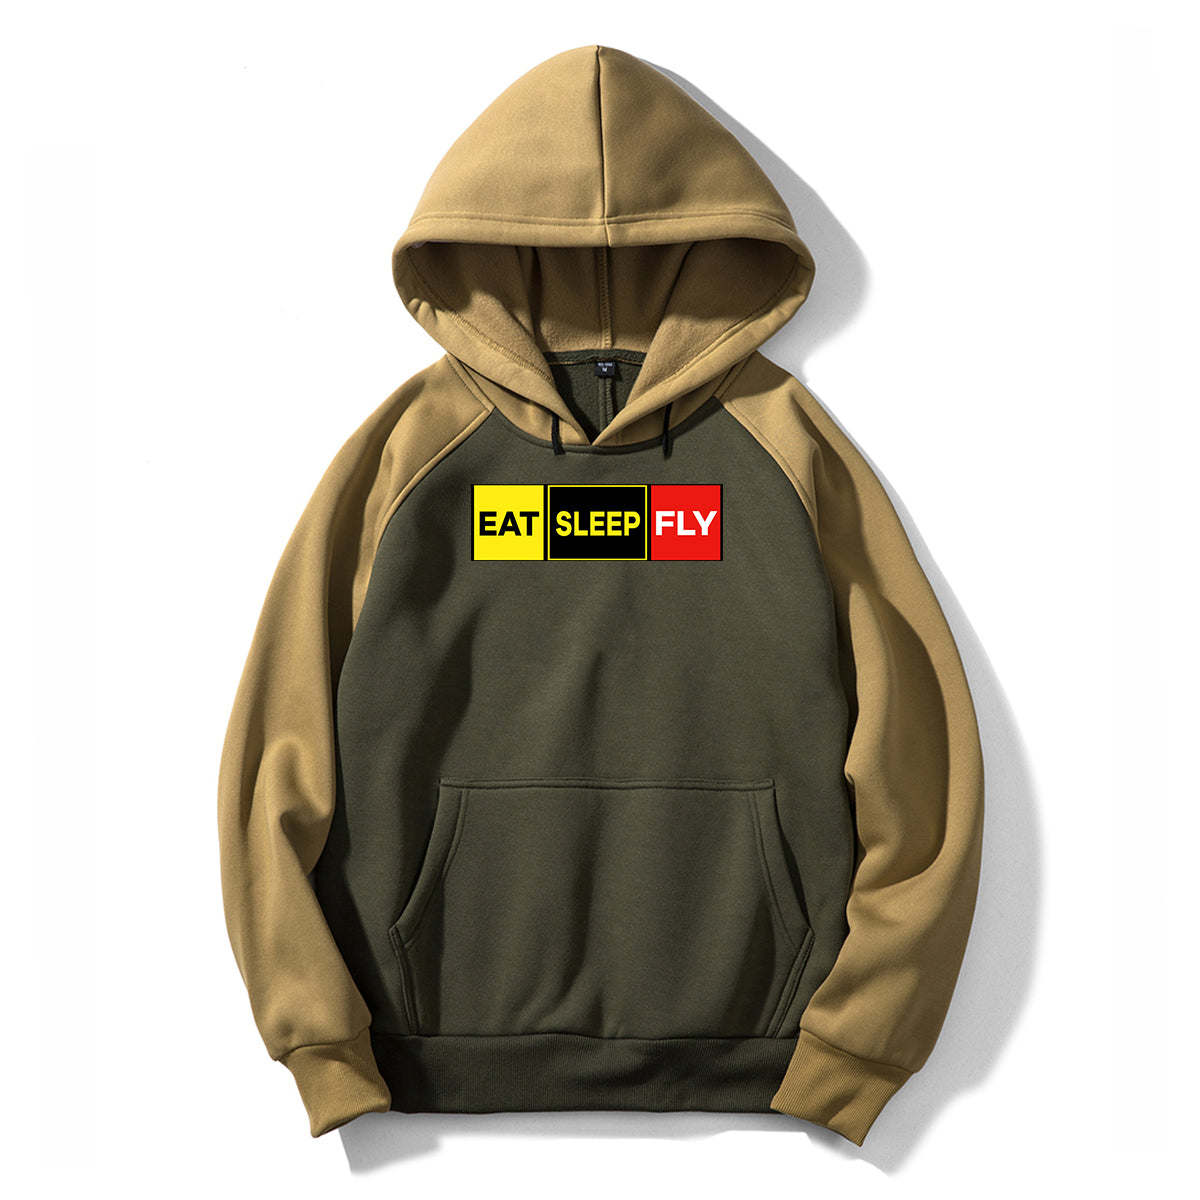 Eat Sleep Fly (Colourful) Designed Colourful Hoodies